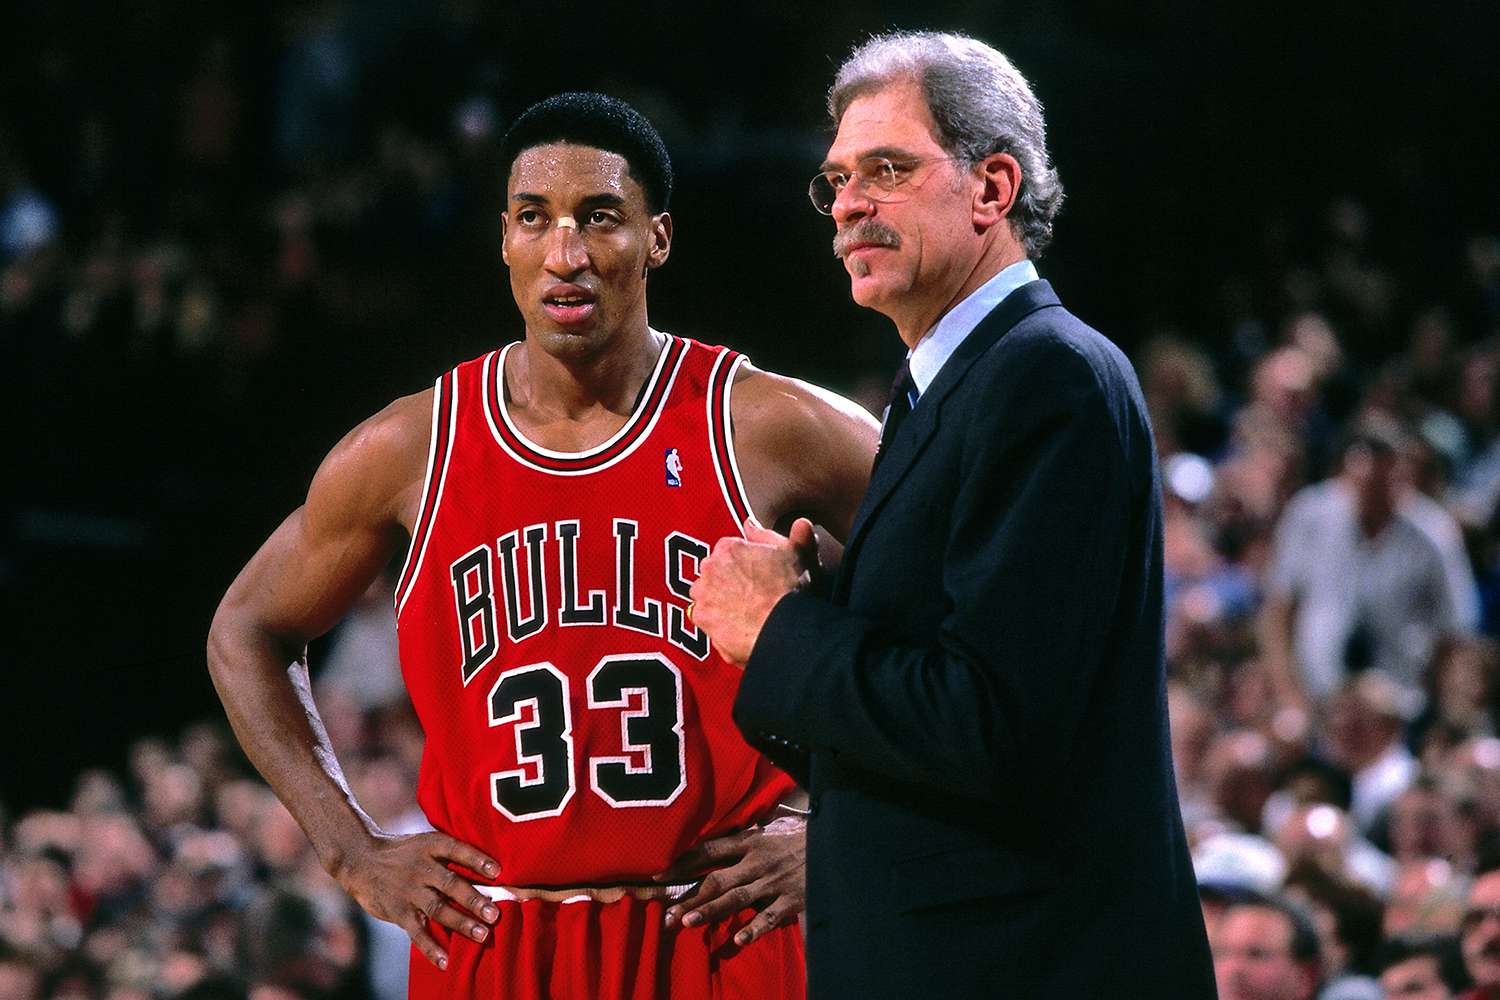 Scottie Pippen #33 and Head Coach Phil Jackson of the Chicago Bulls